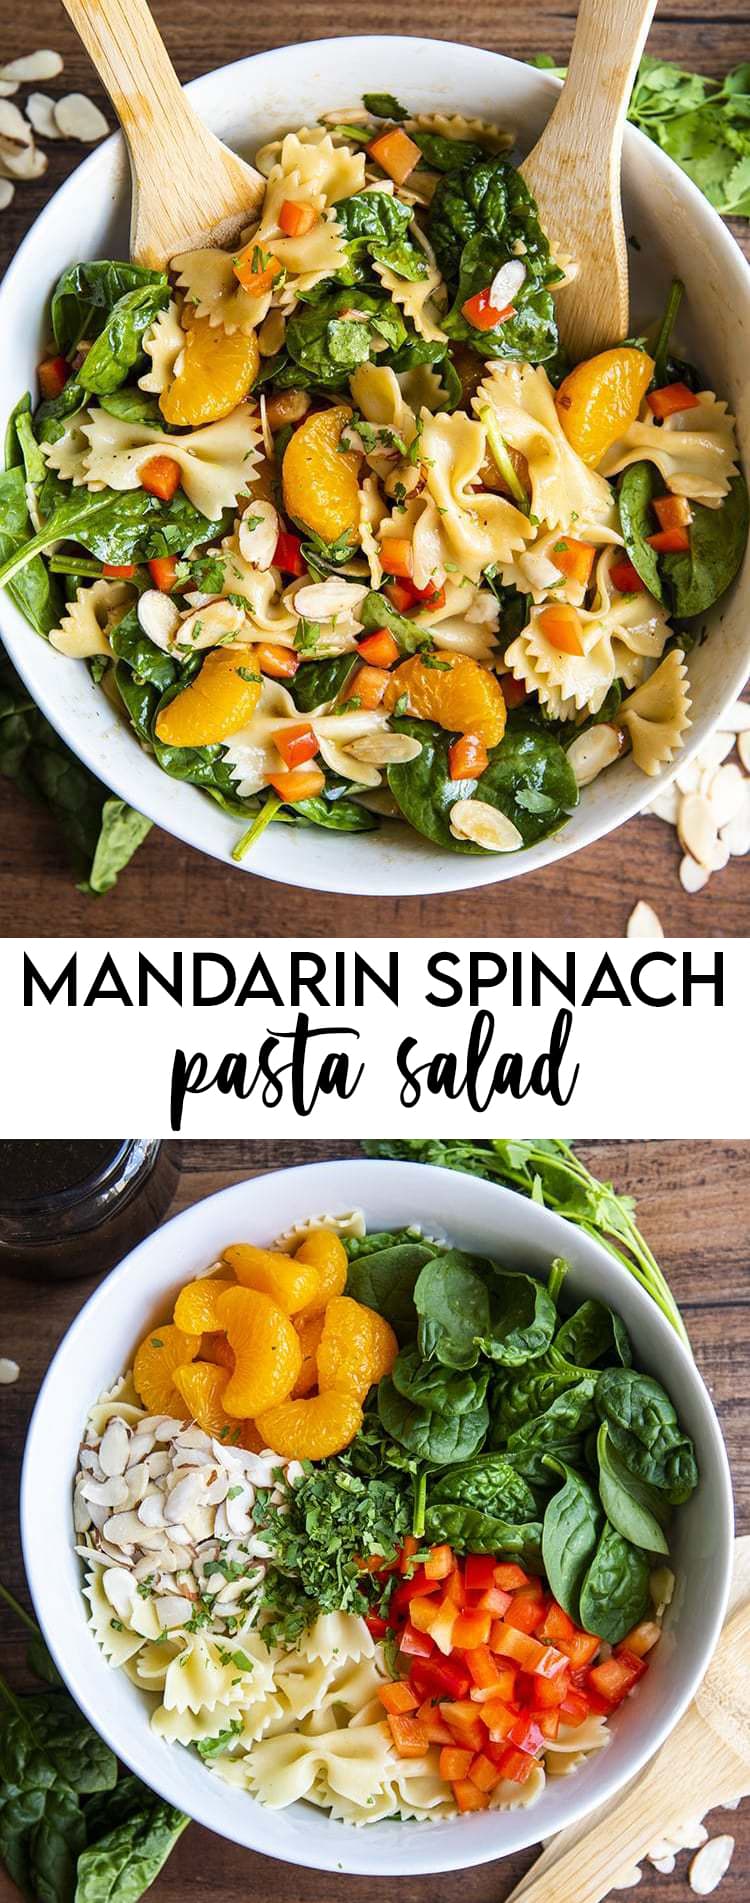 Mandarin Spinach Pasta Salad with text overlay for pinterest